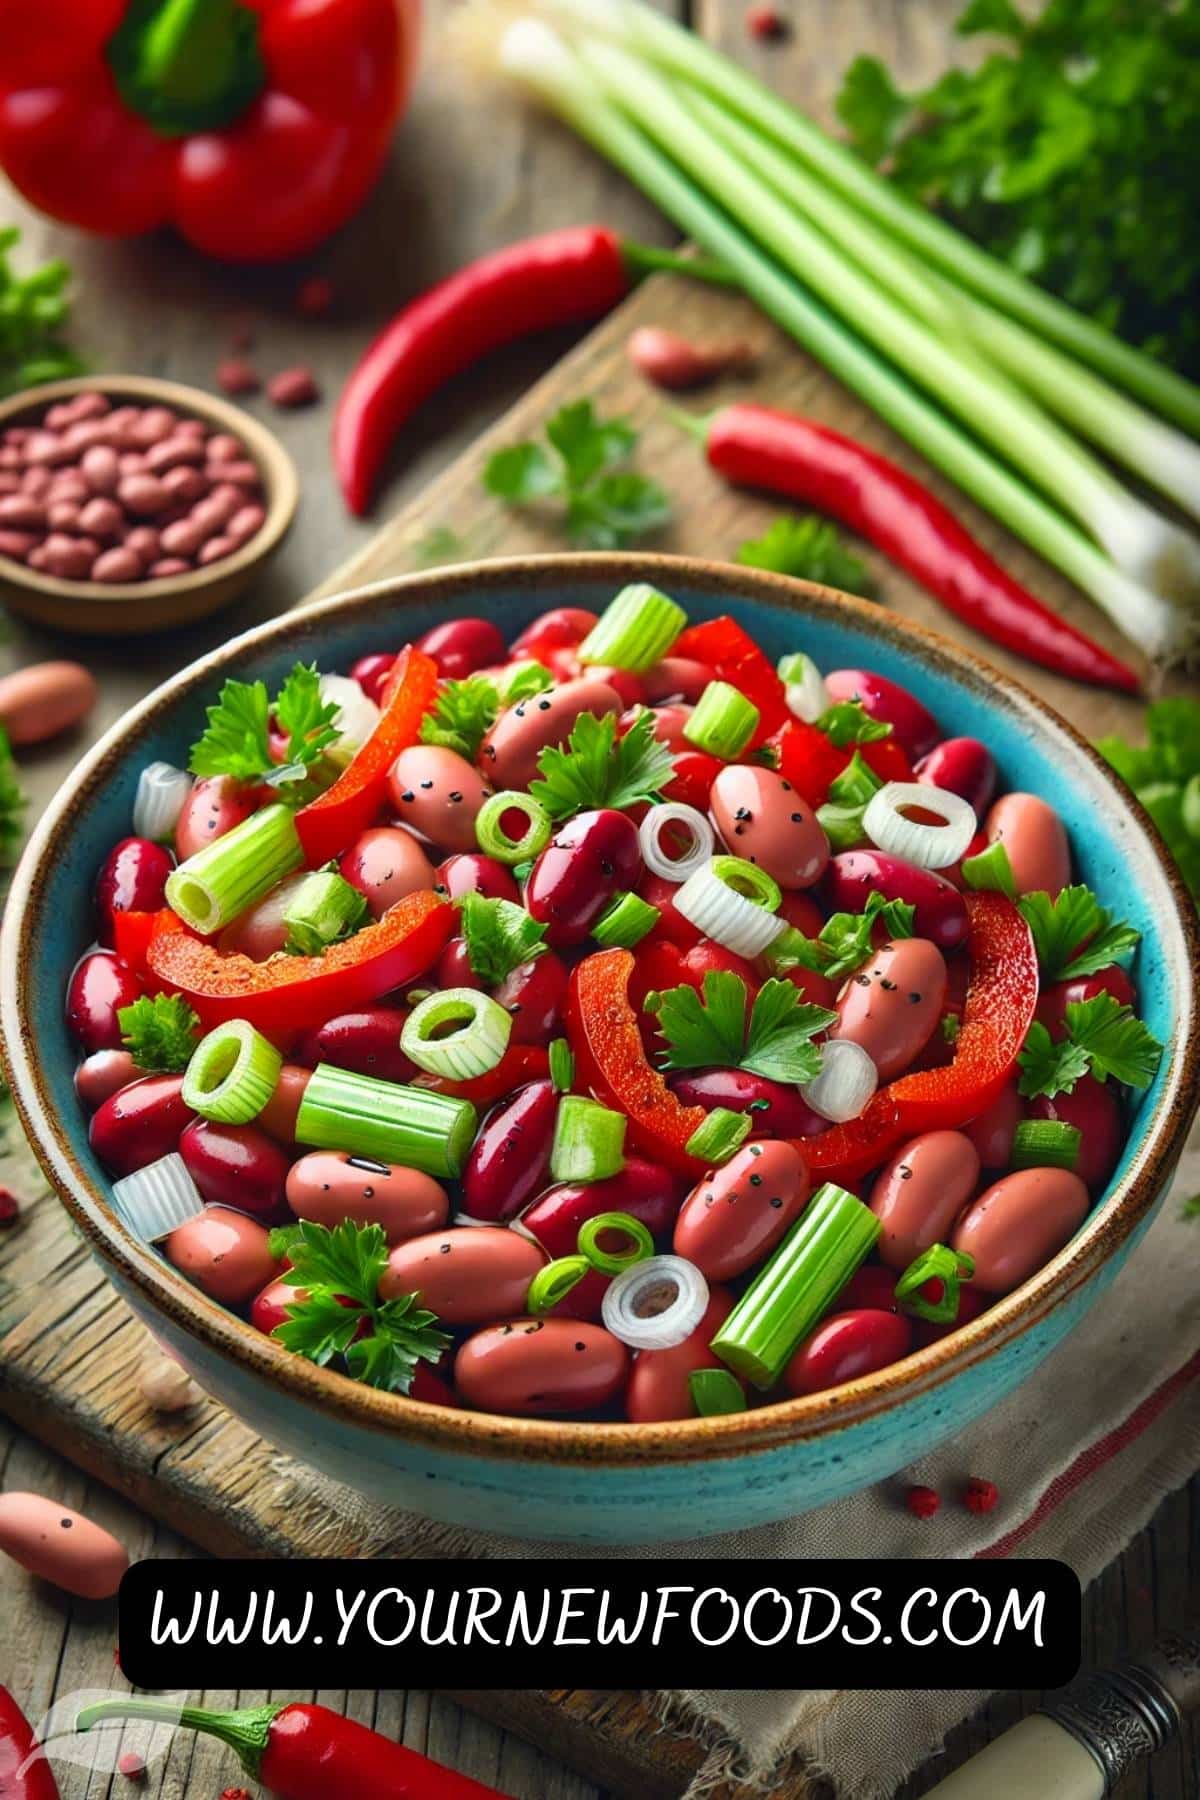 A vibrant red kidney bean salad in a bowl.